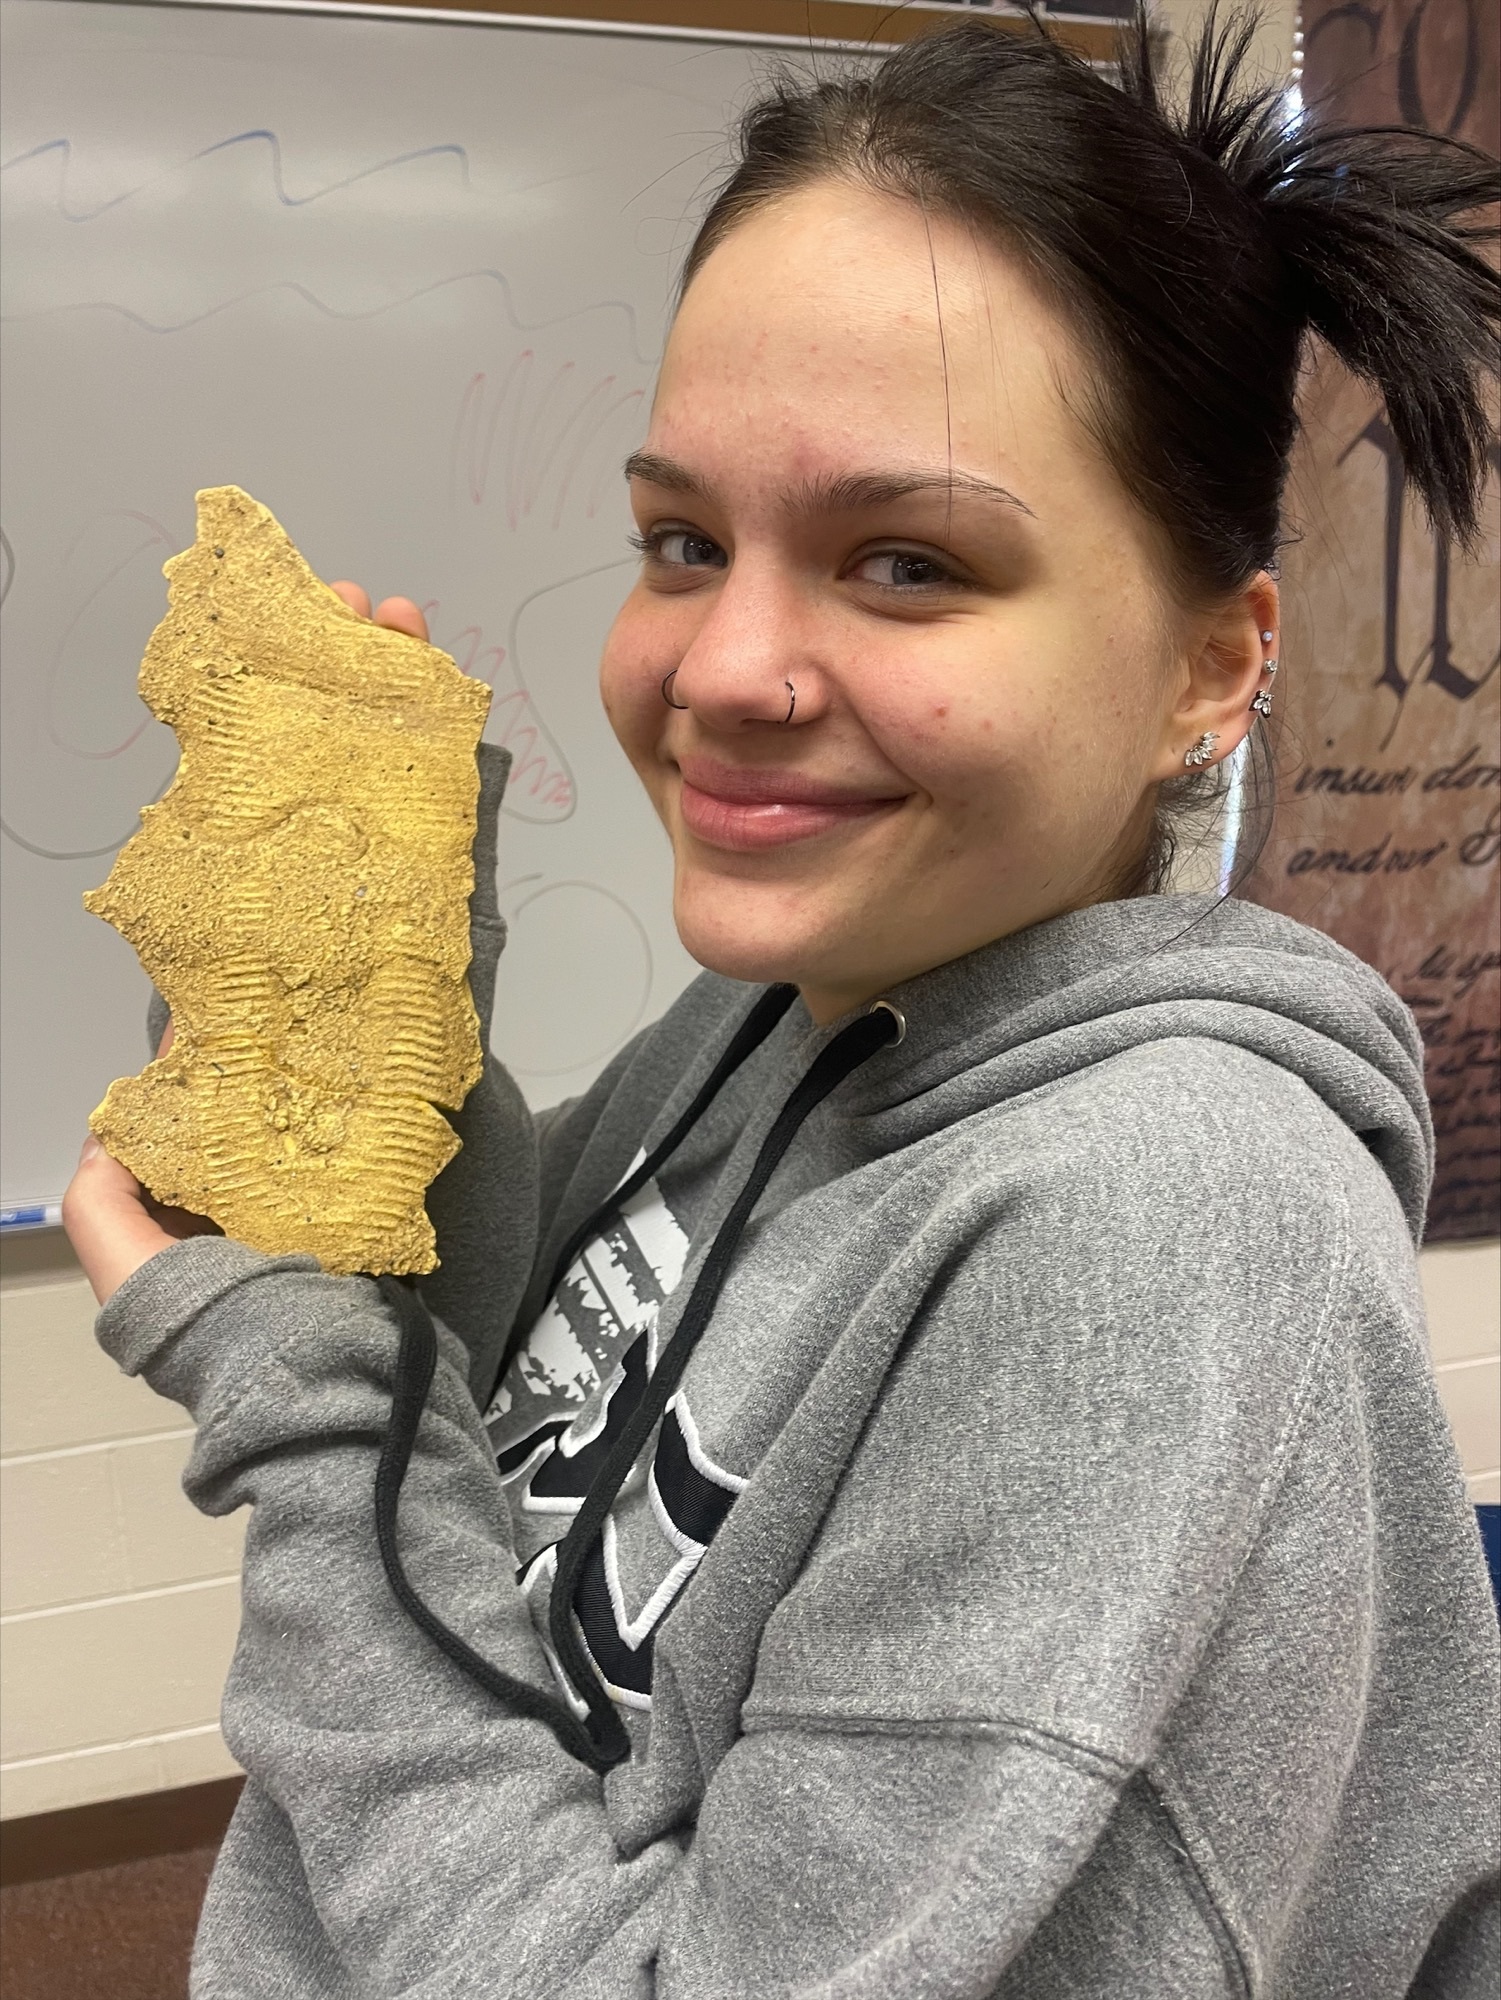 public safety student posing with her shoe imprint cast